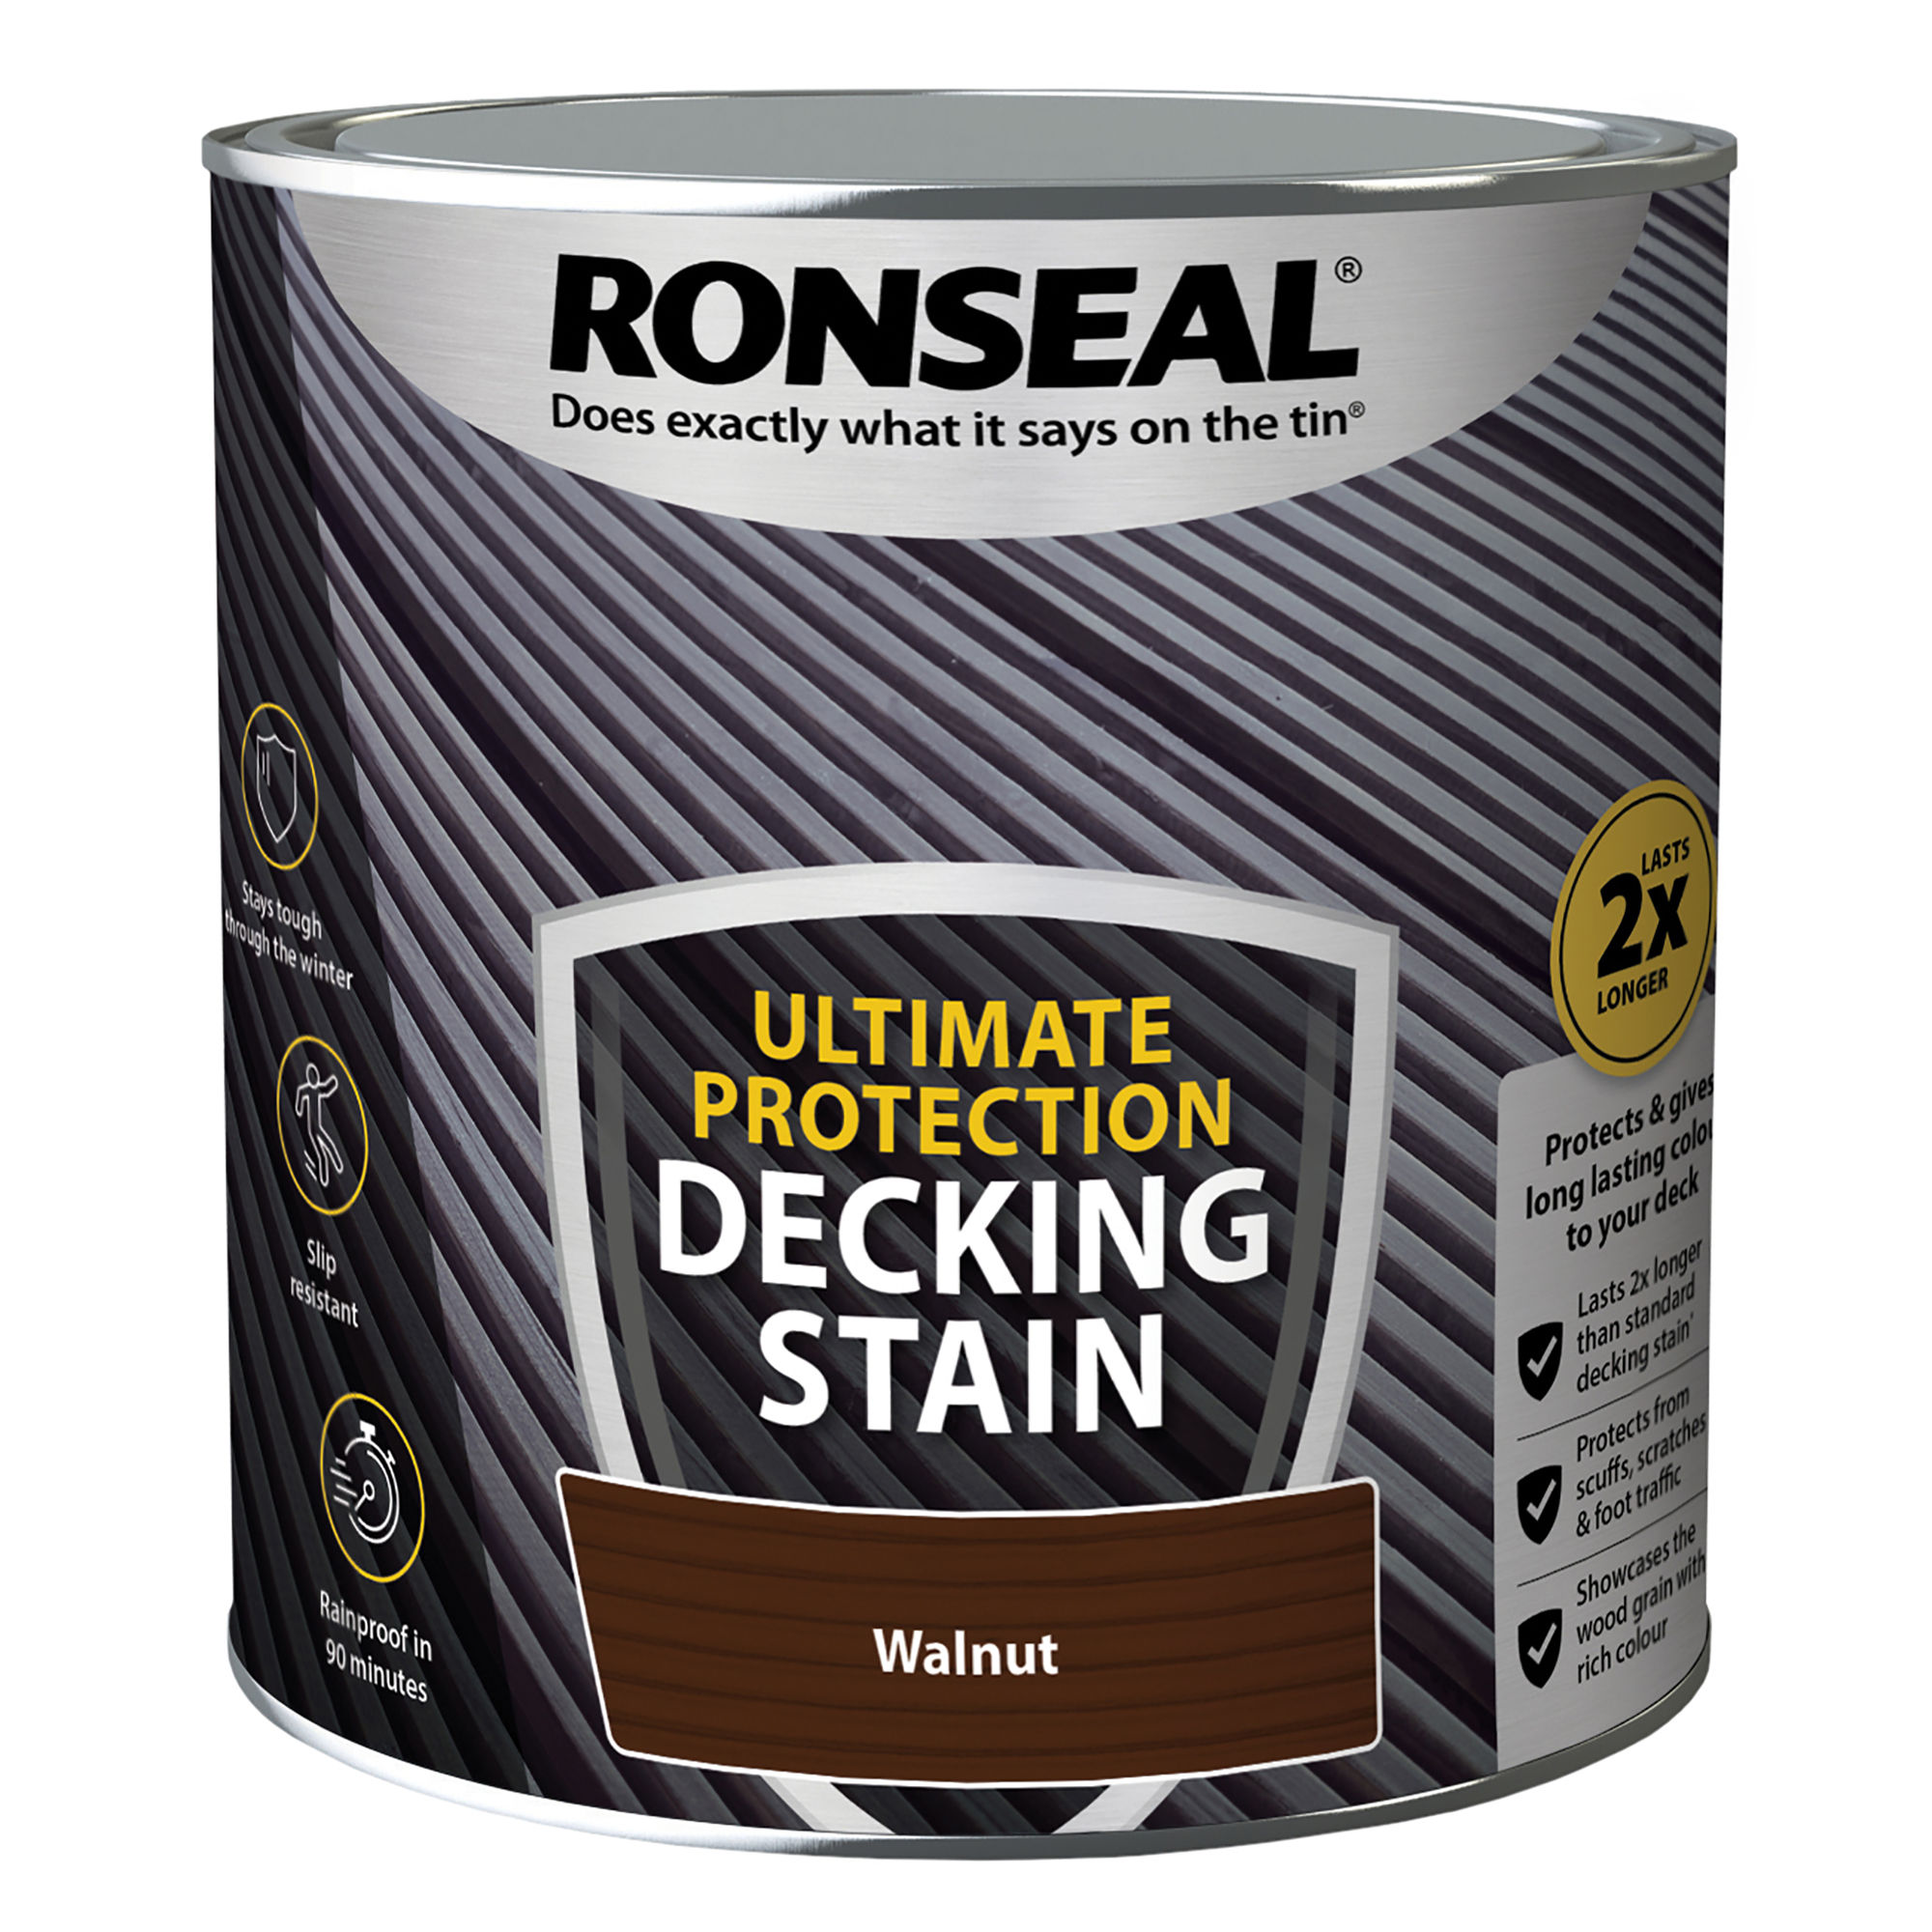 Ronseal Ultimate Protection Decking Stain - Walnut (2.5L)